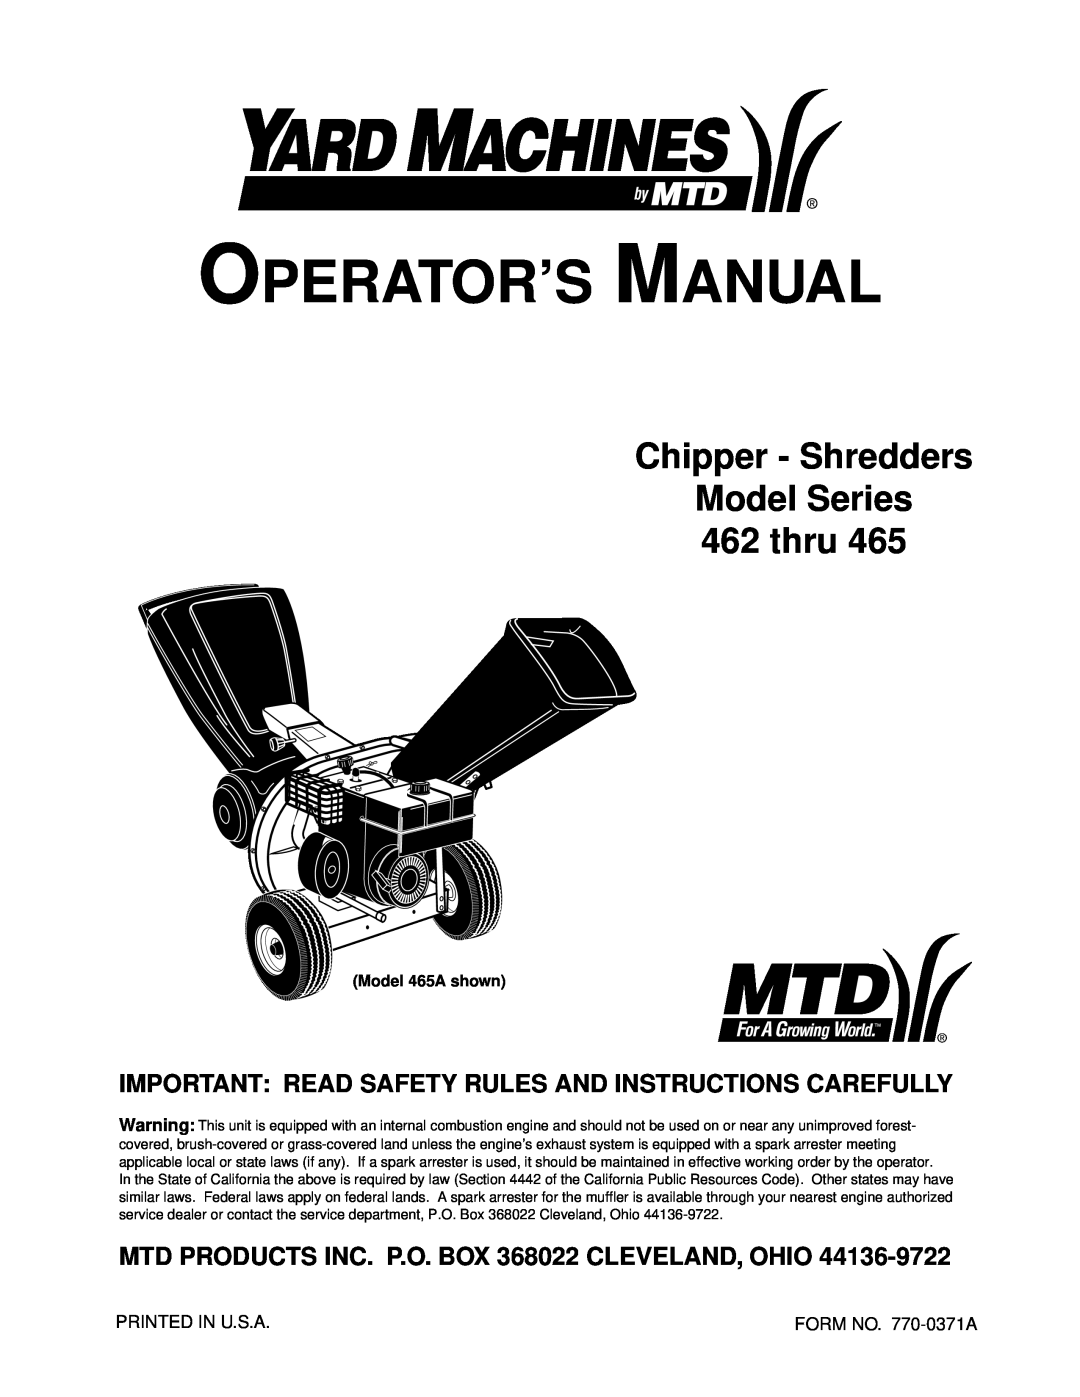 Bolens 462 Thru 465 manual Important Read Safety Rules And Instructions Carefully, Operator’S Manual, Model 465A shown 